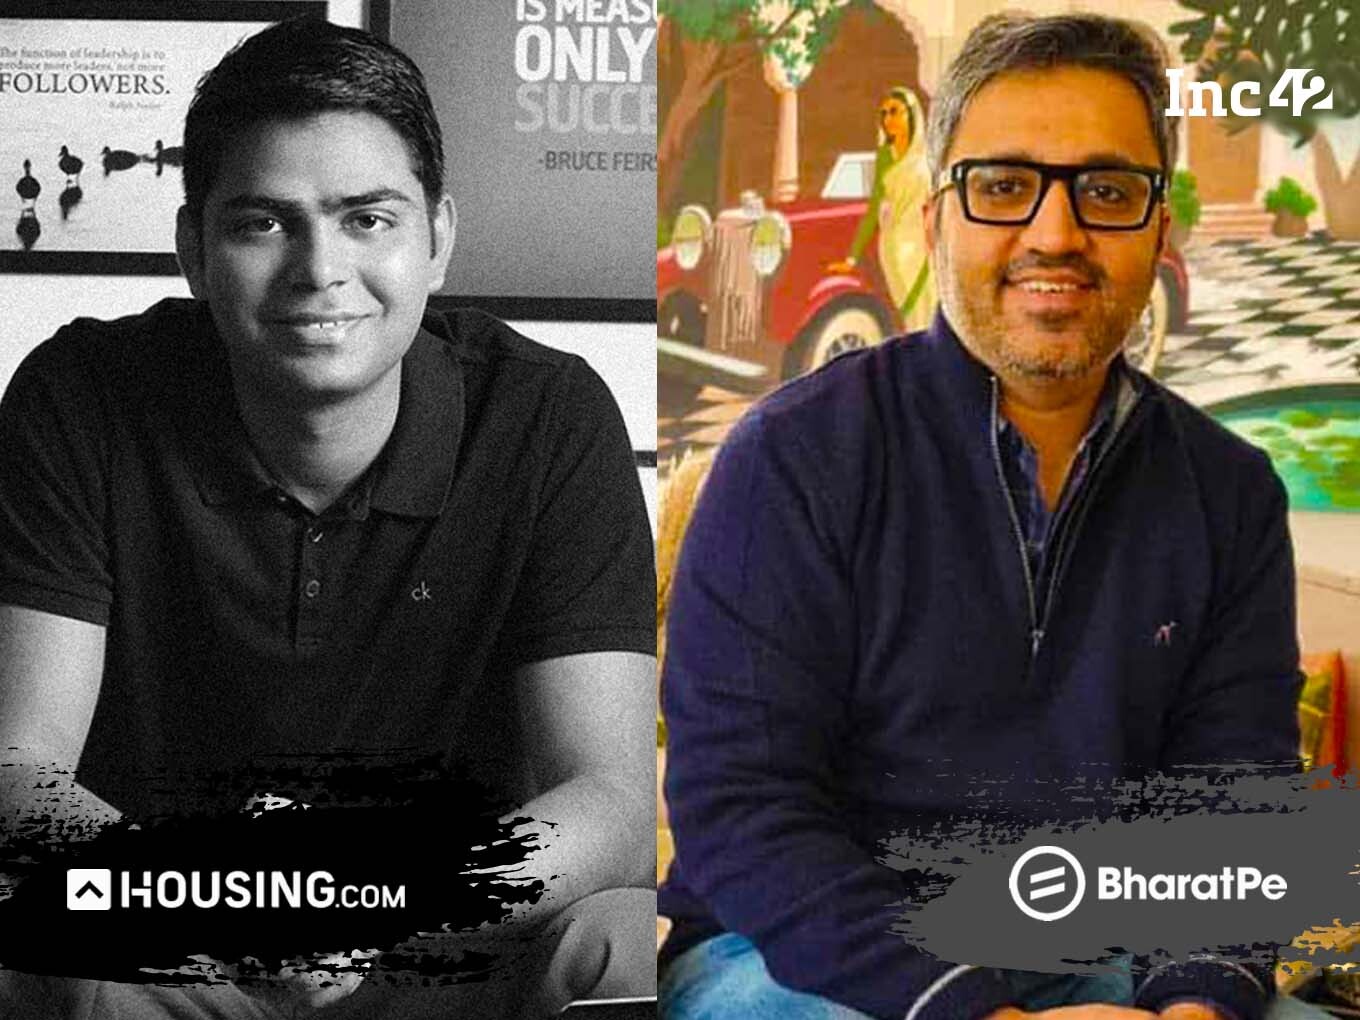 In Battle With Ashneer Grover, Will BharatPe Go The Housing.com Way?